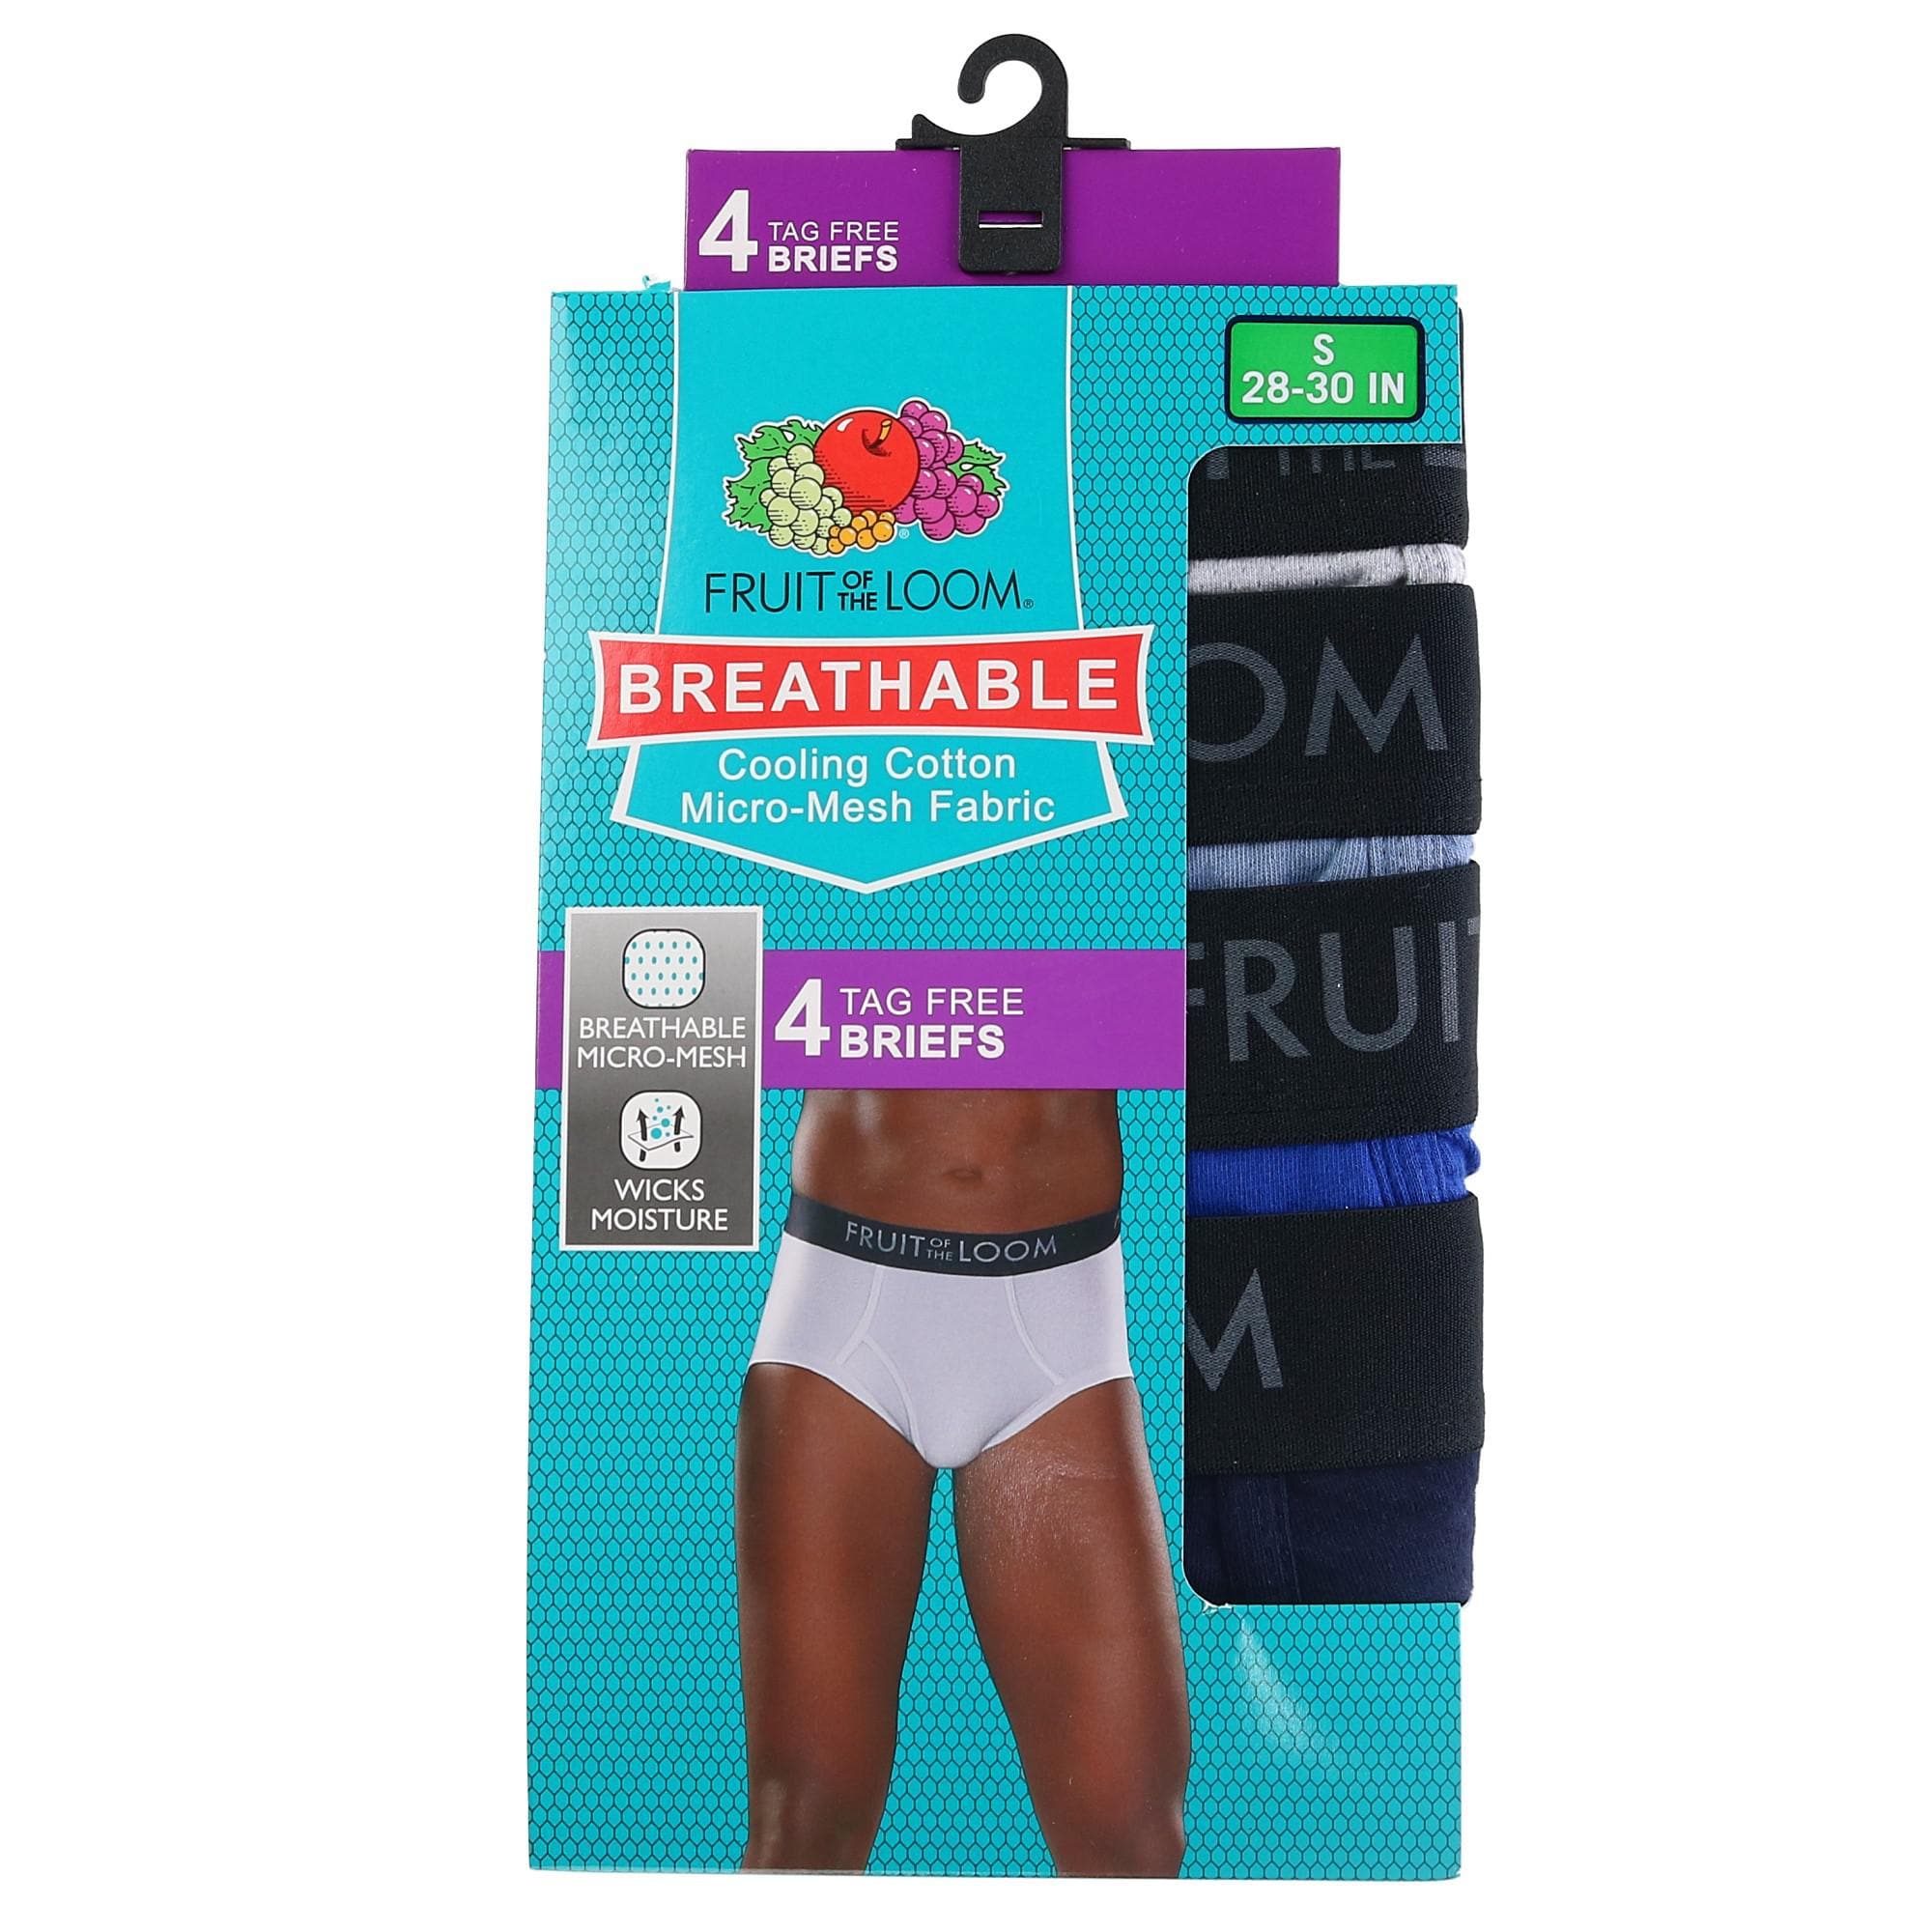 Men's Breathable Brief Underwear (Pack of 4) by Fruit of the Loom